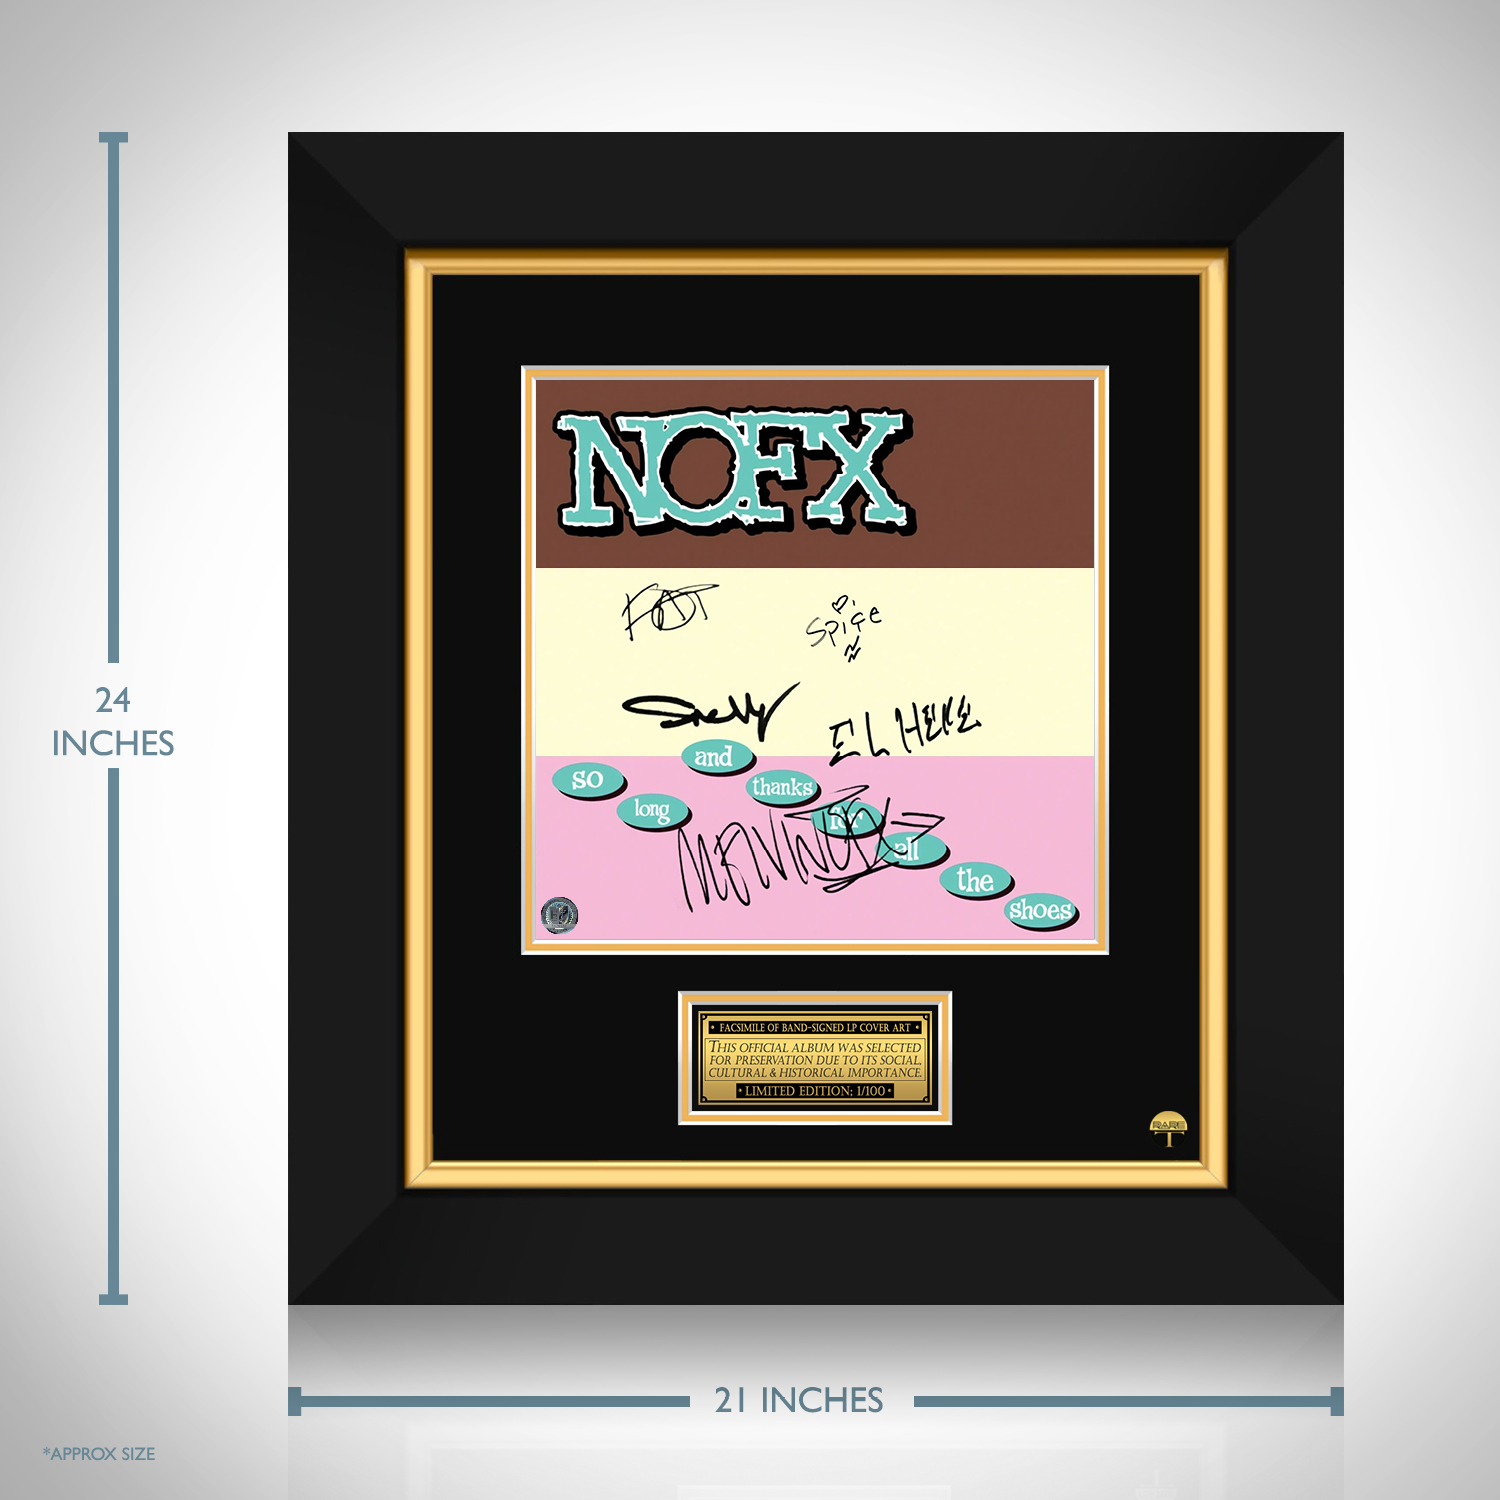 NOFX - So Long And Thanks For All The Shoes LP Cover Limited 